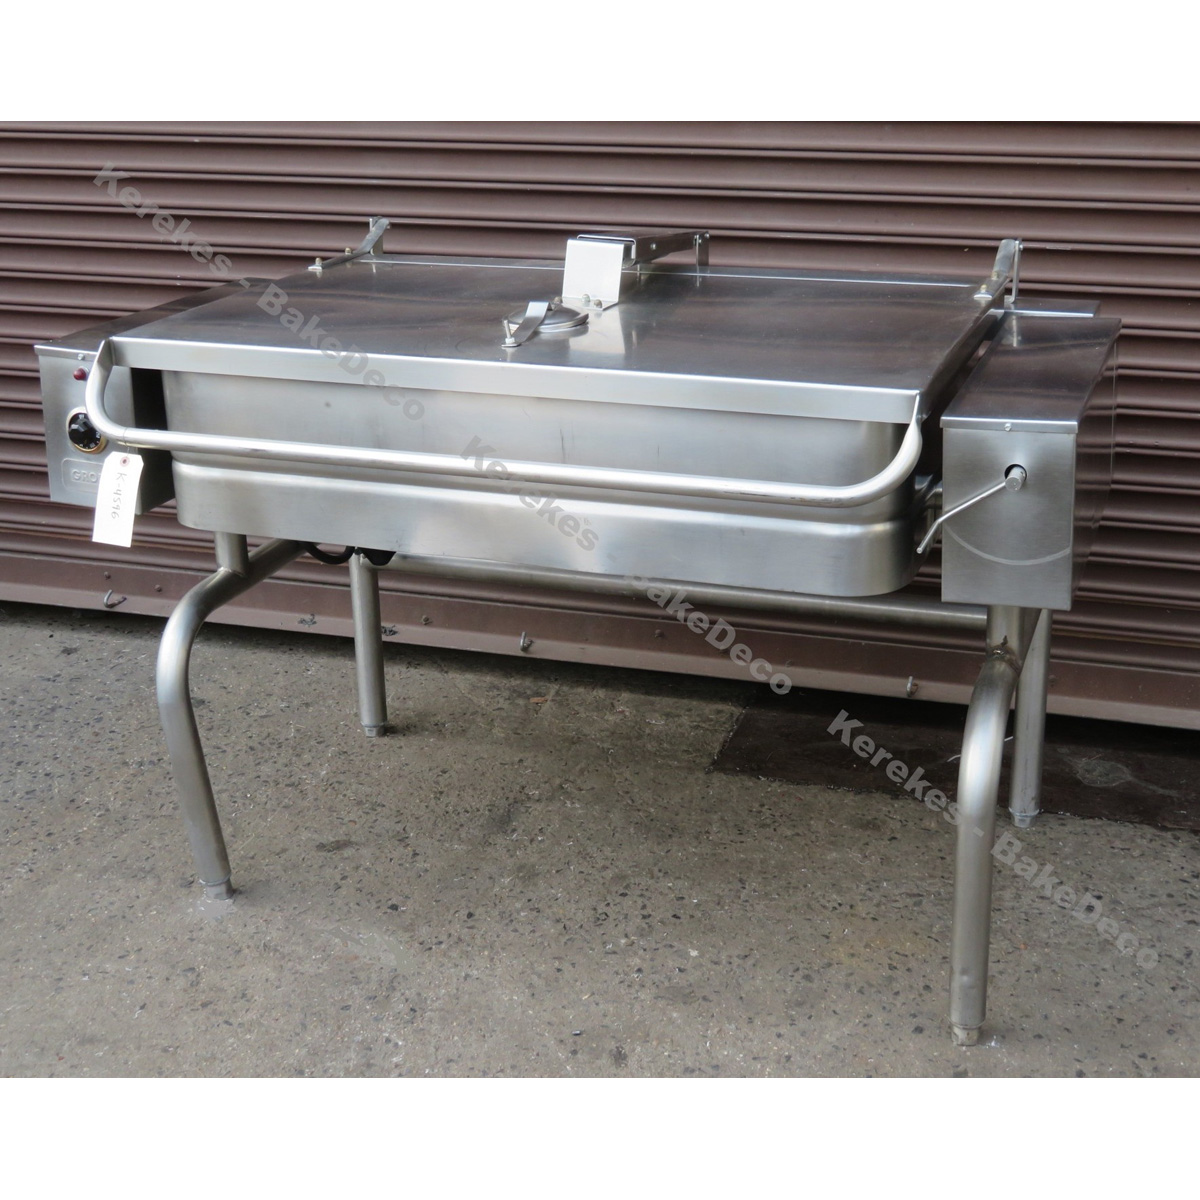 Groen Skillet 40 gallon FPC-4, 480 Volt, Used Great Condition